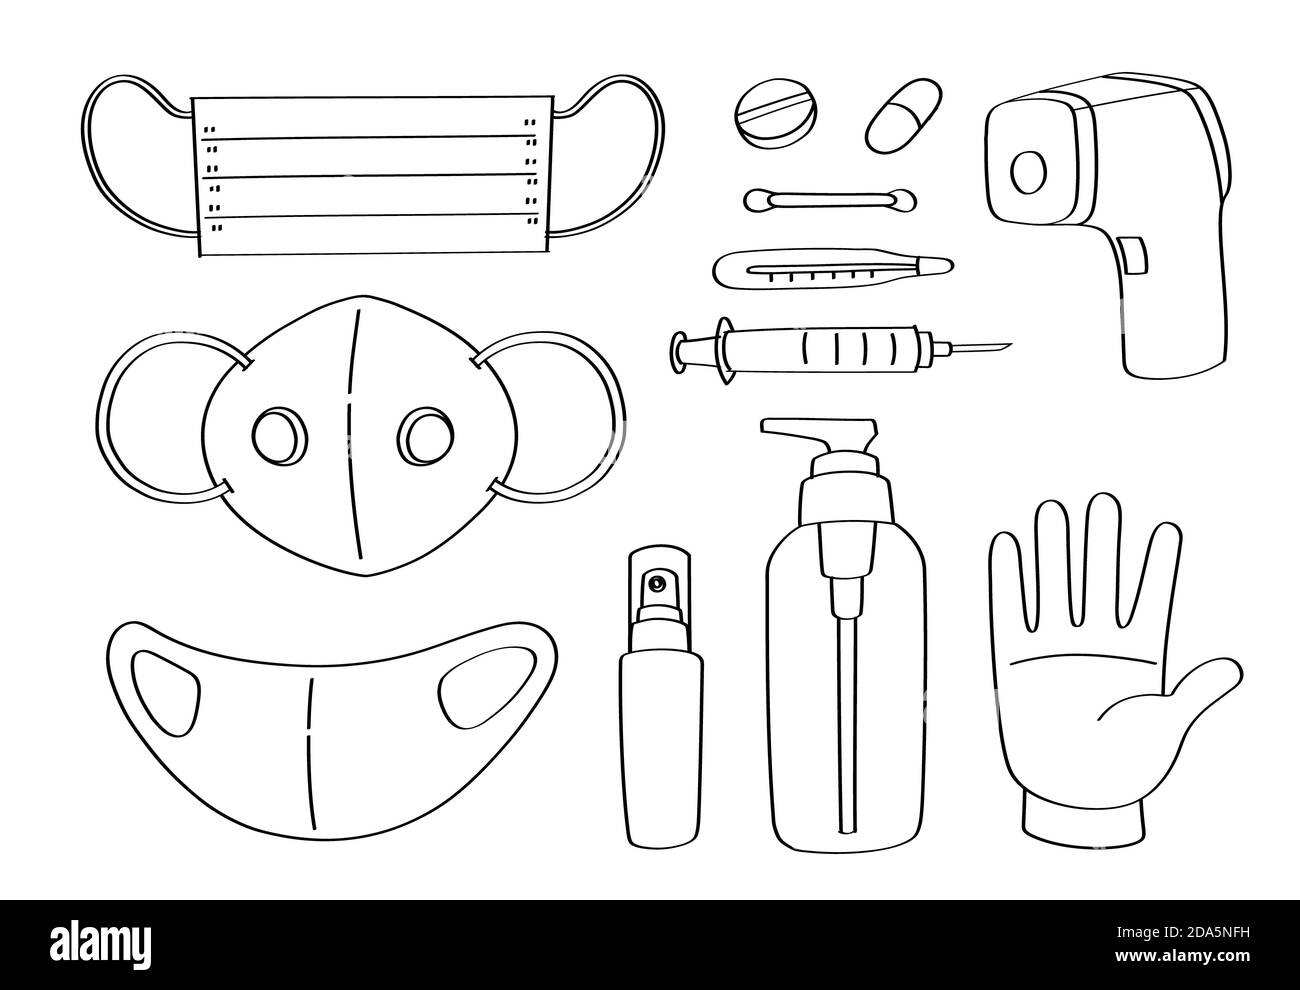 Cute doodle medical object cartoon icons and objects. Covid-19, Coronavirus protection. Stock Photo